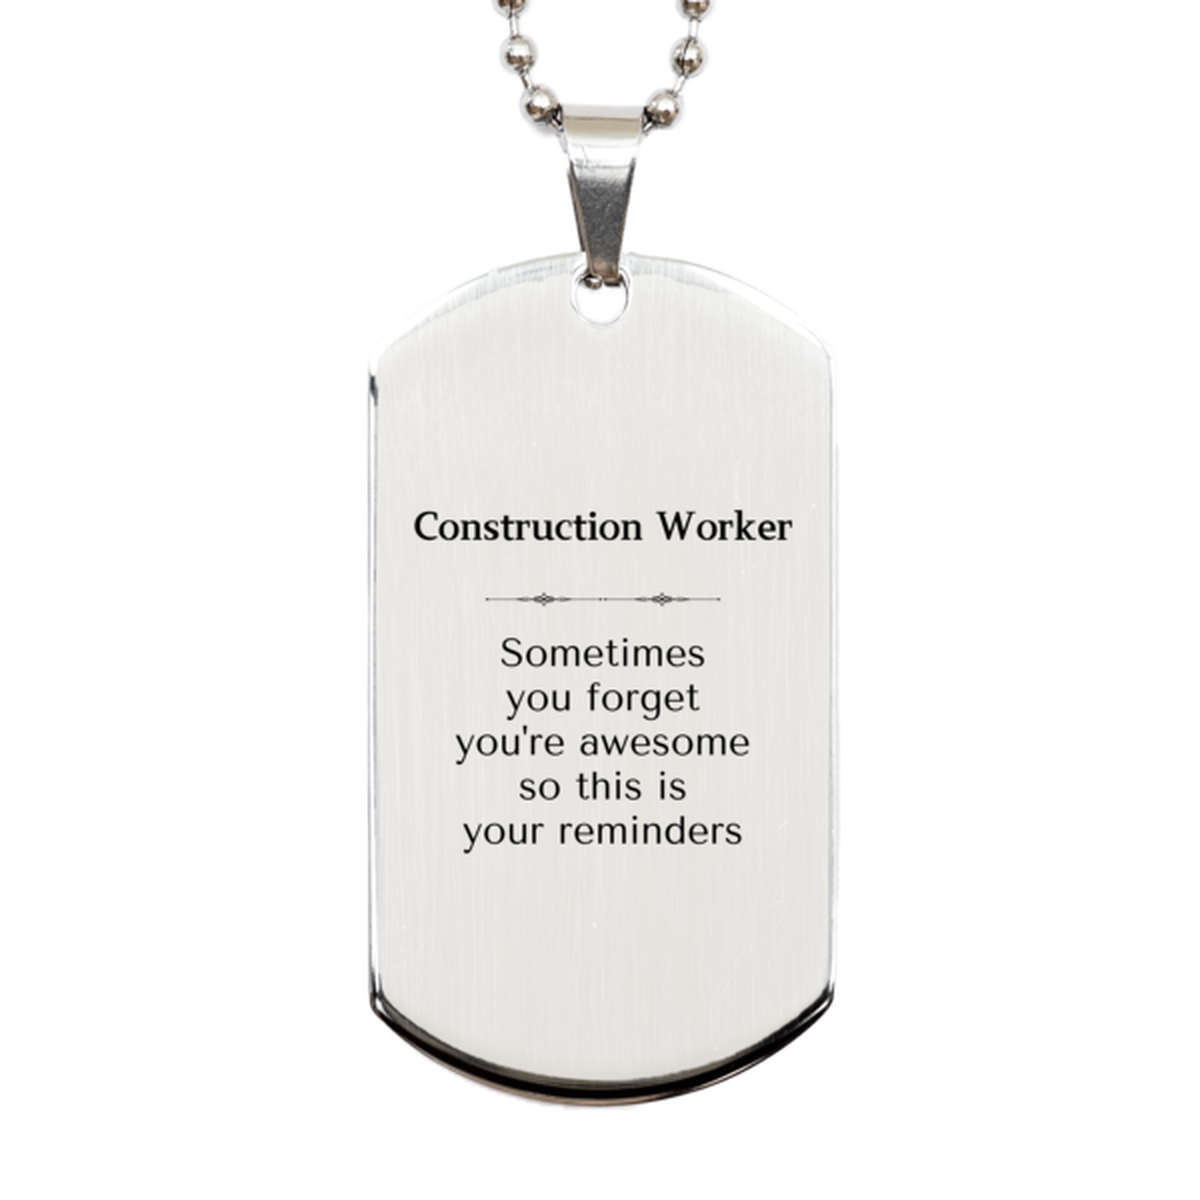 Sentimental Construction Worker Silver Dog Tag, Construction Worker Sometimes you forget you're awesome so this is your reminders, Graduation Christmas Birthday Gifts for Construction Worker, Men, Women, Coworkers